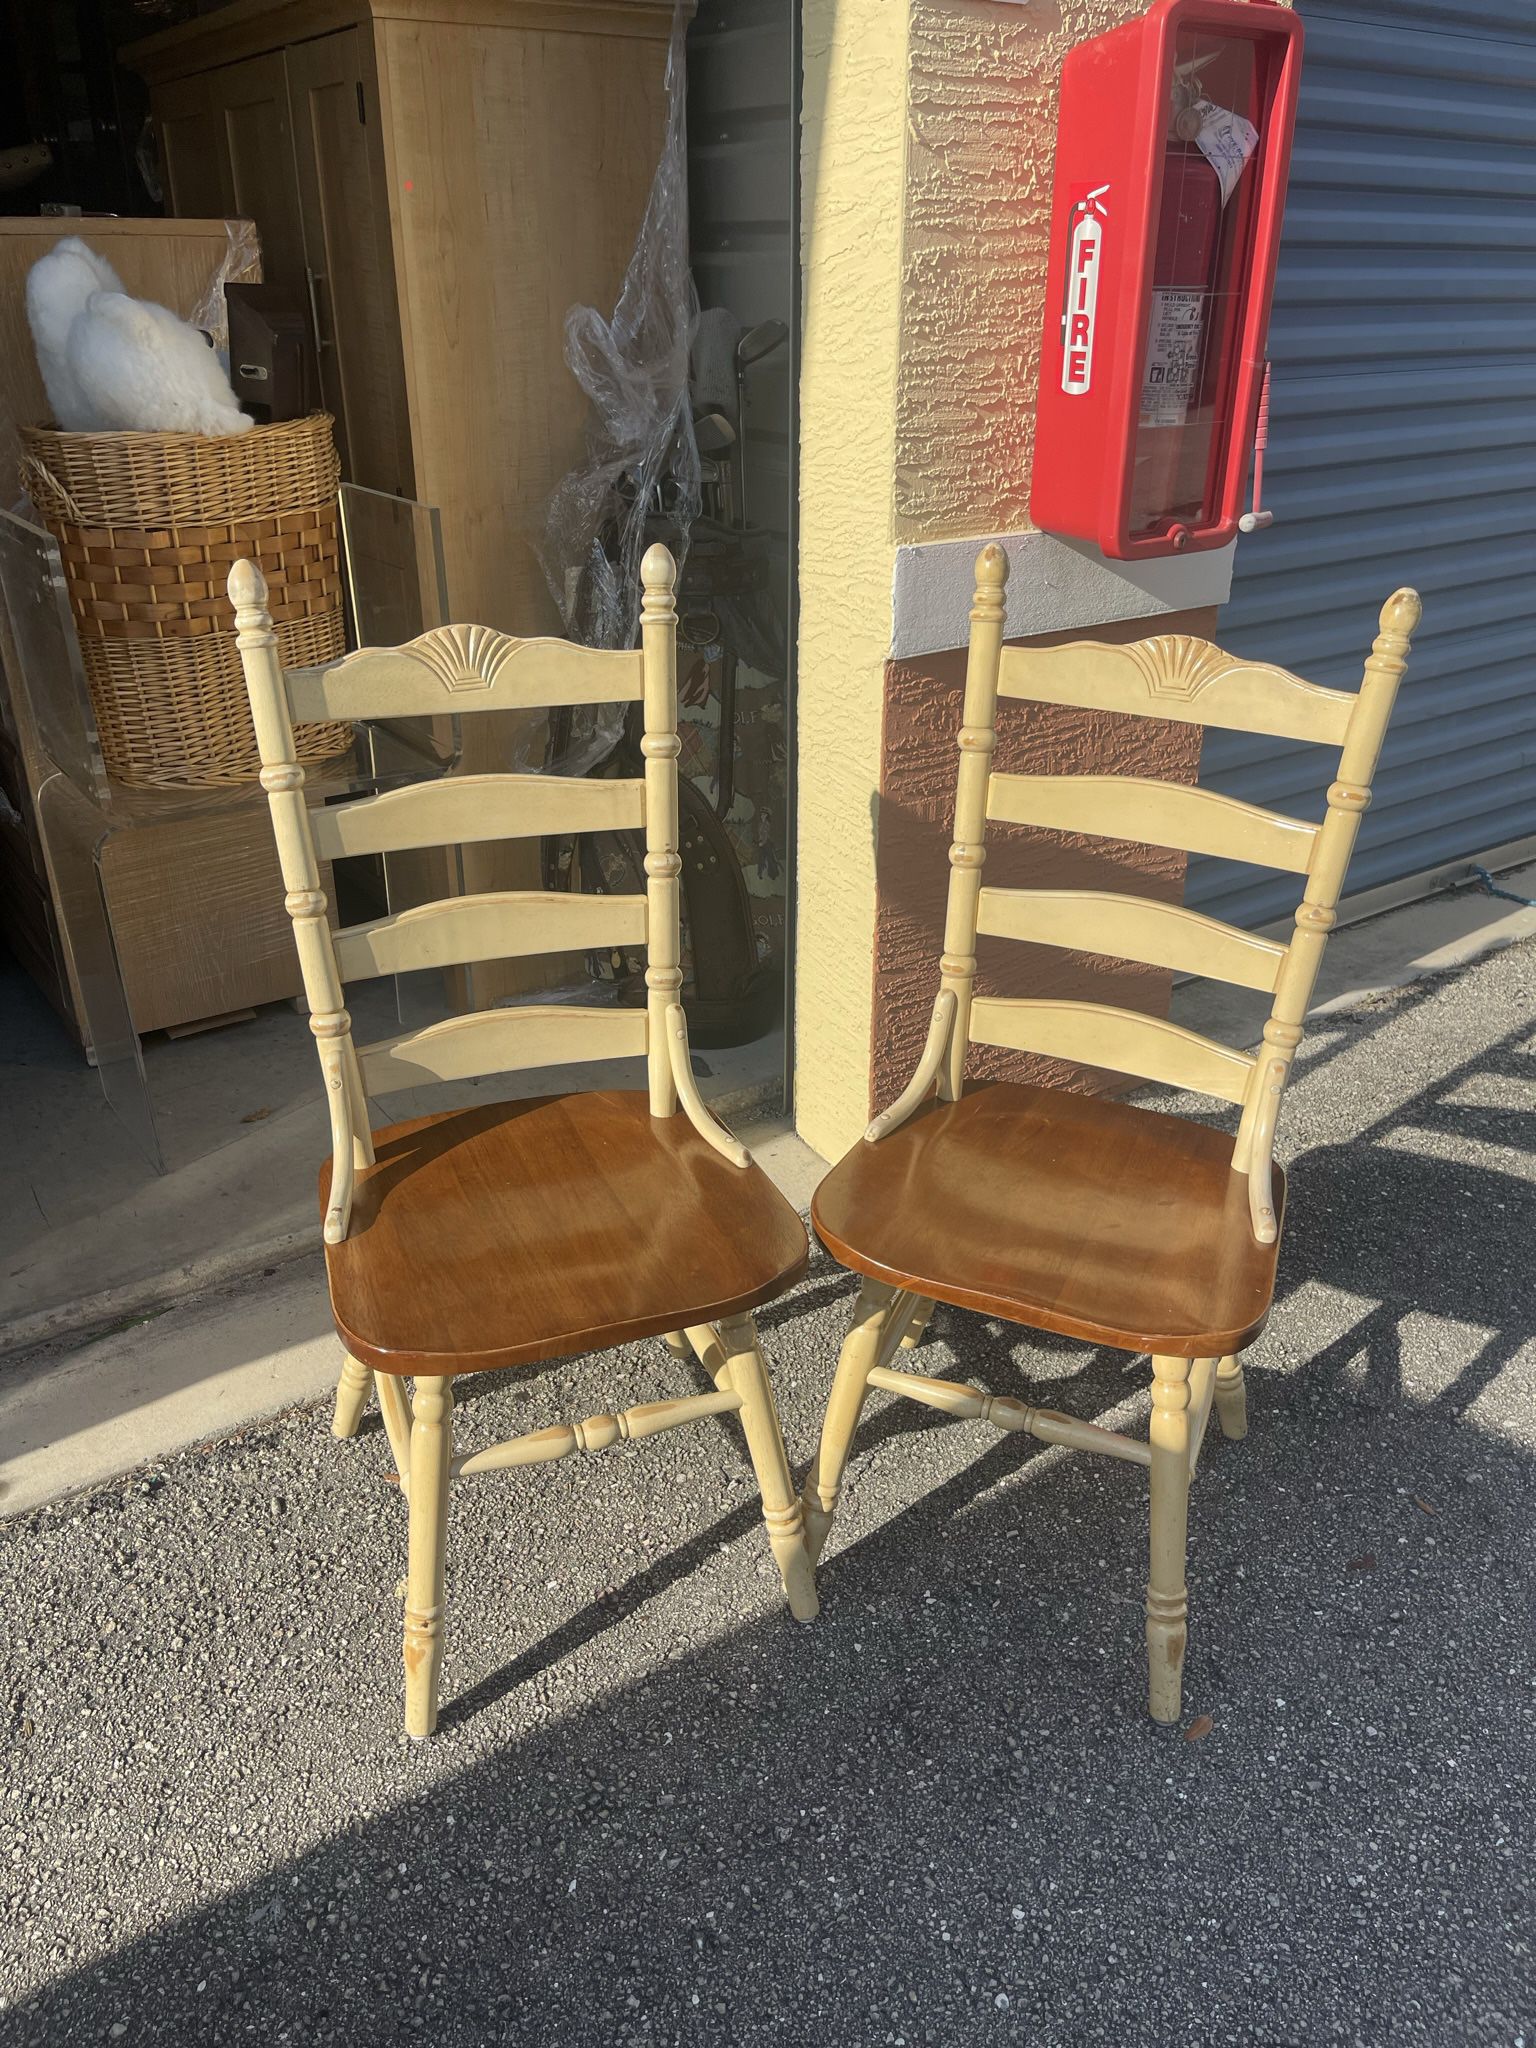 2 Dining Room Chairs - $15